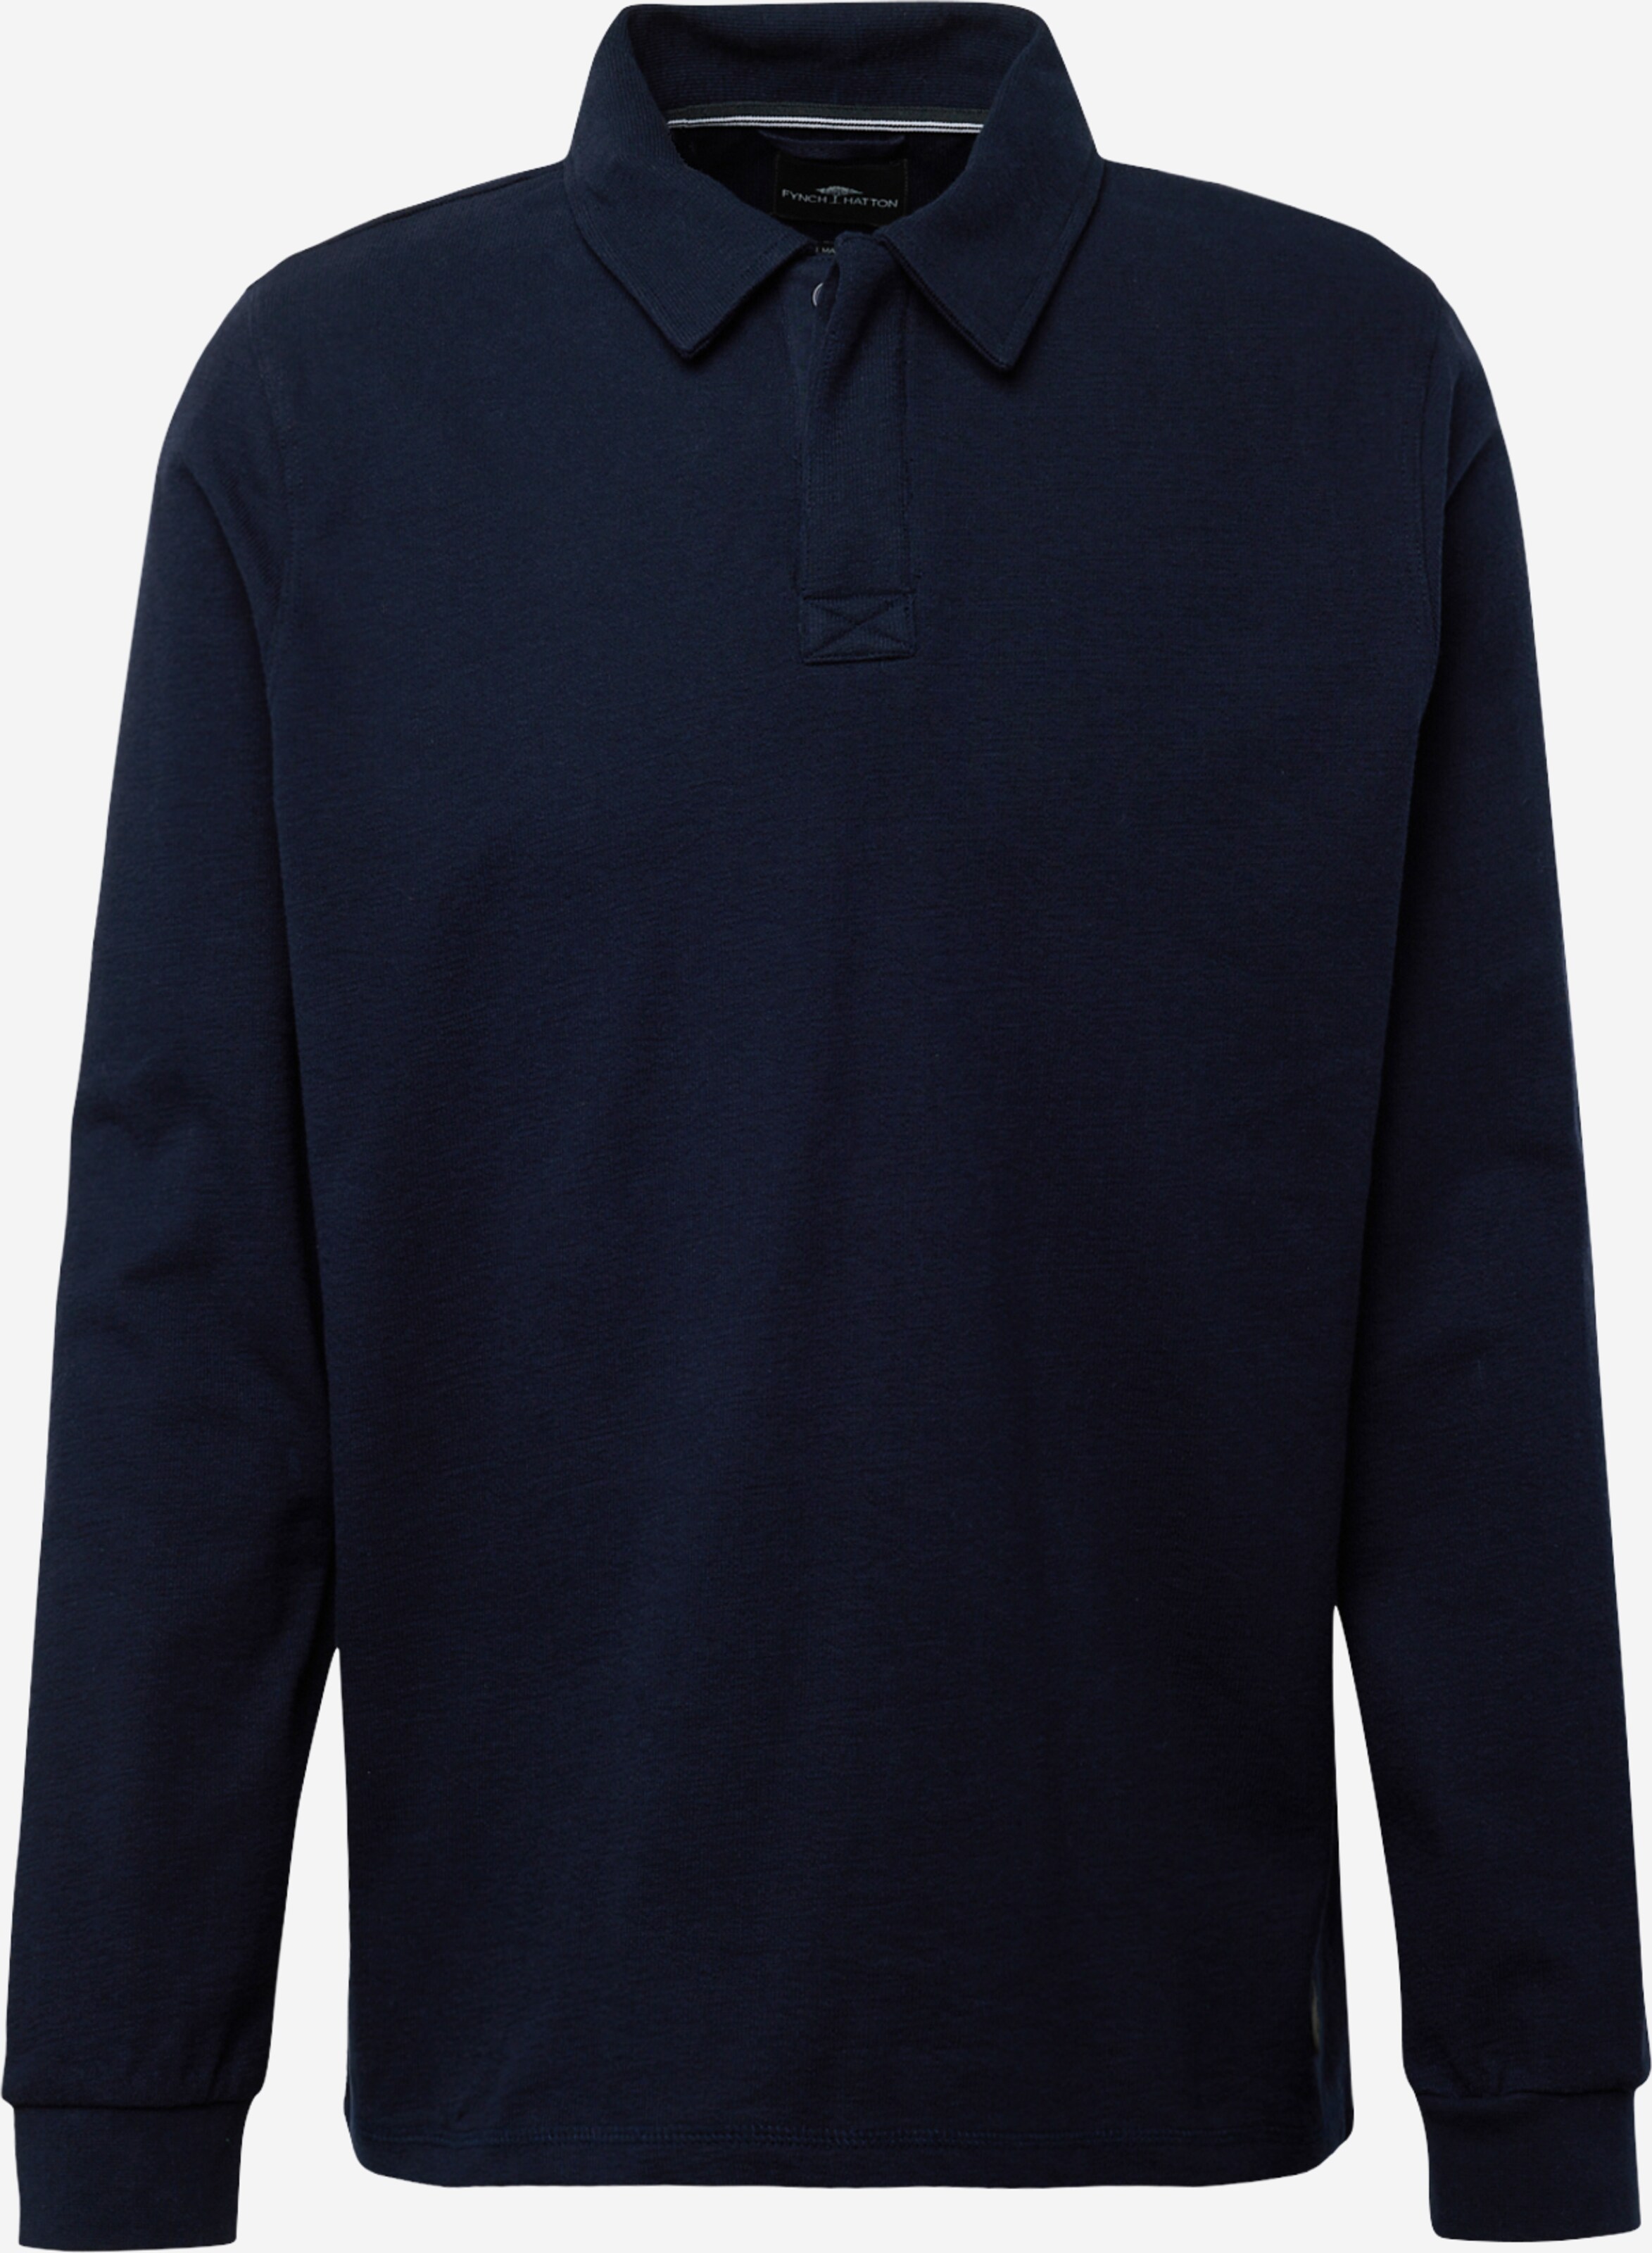 ABOUT Navy YOU Shirt in | FYNCH-HATTON